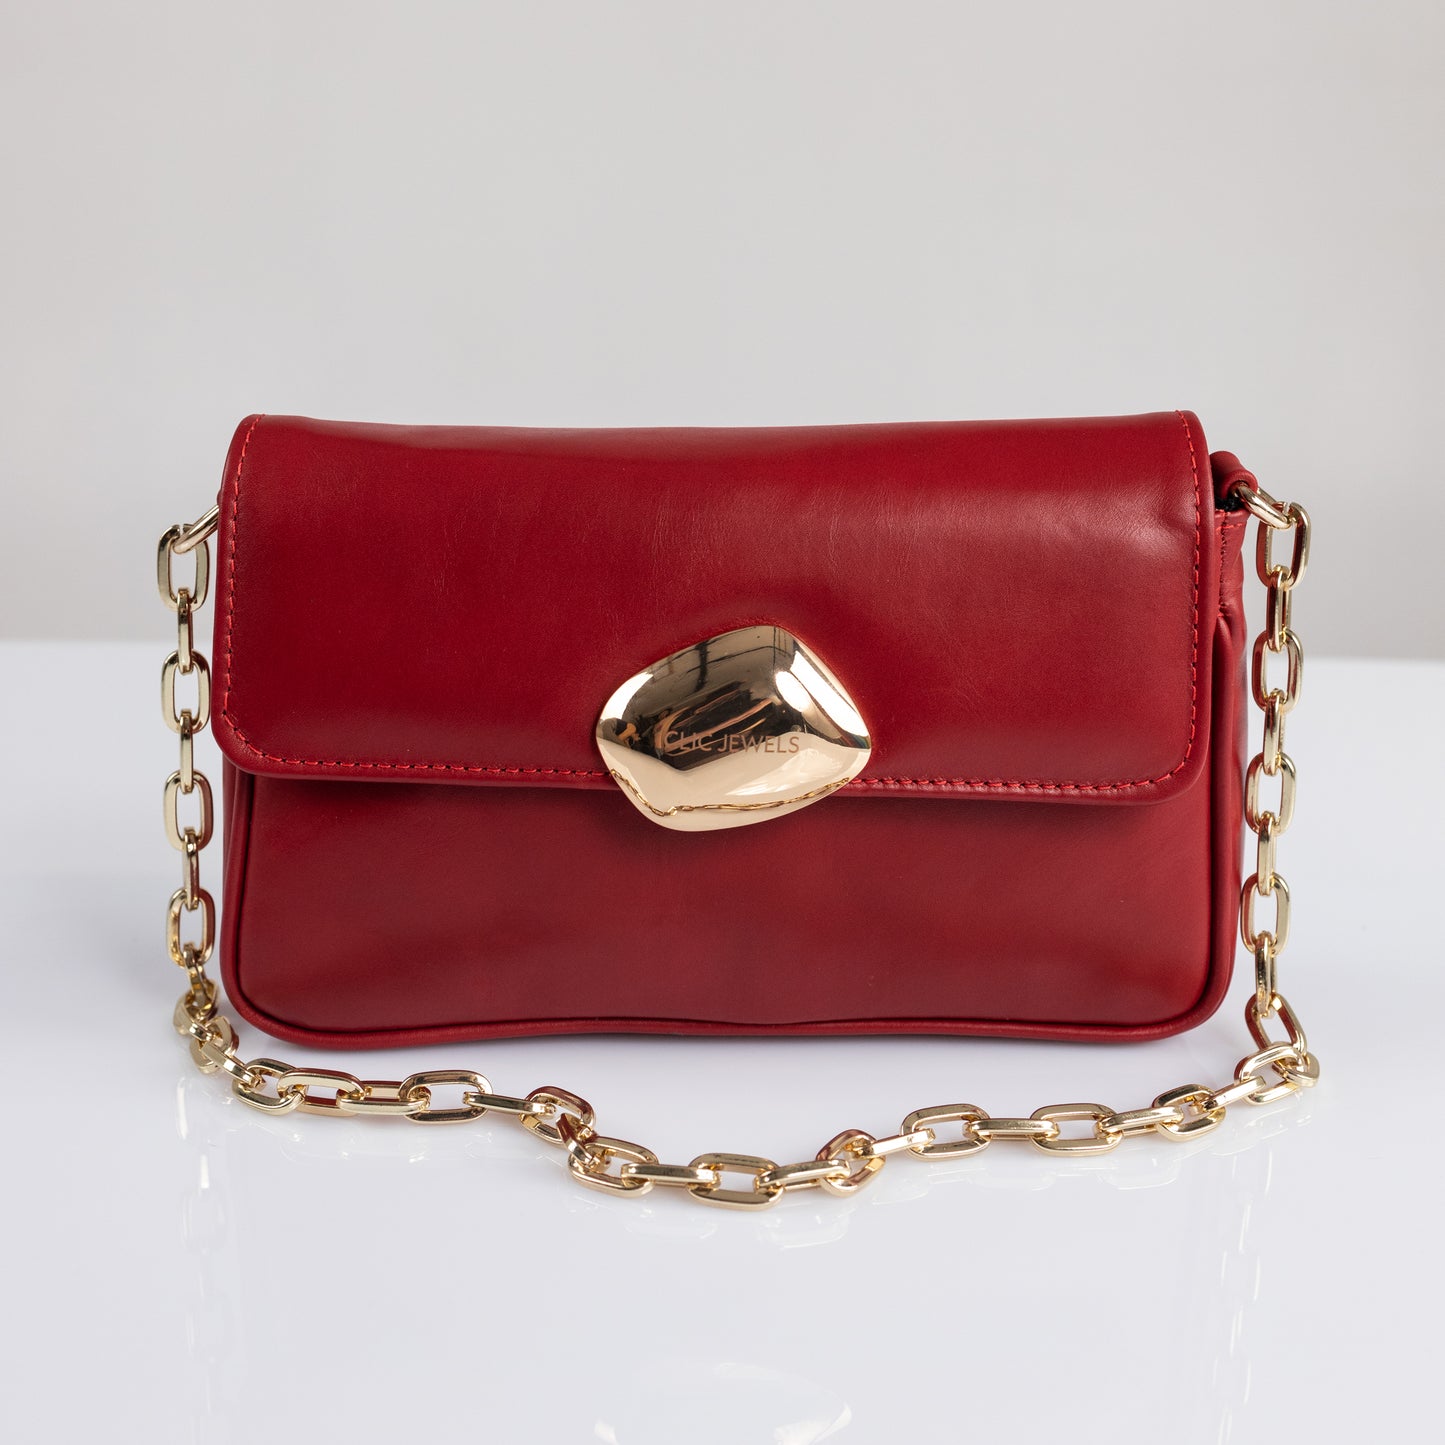 LILY MEDIUM (cherry red smooth leather)